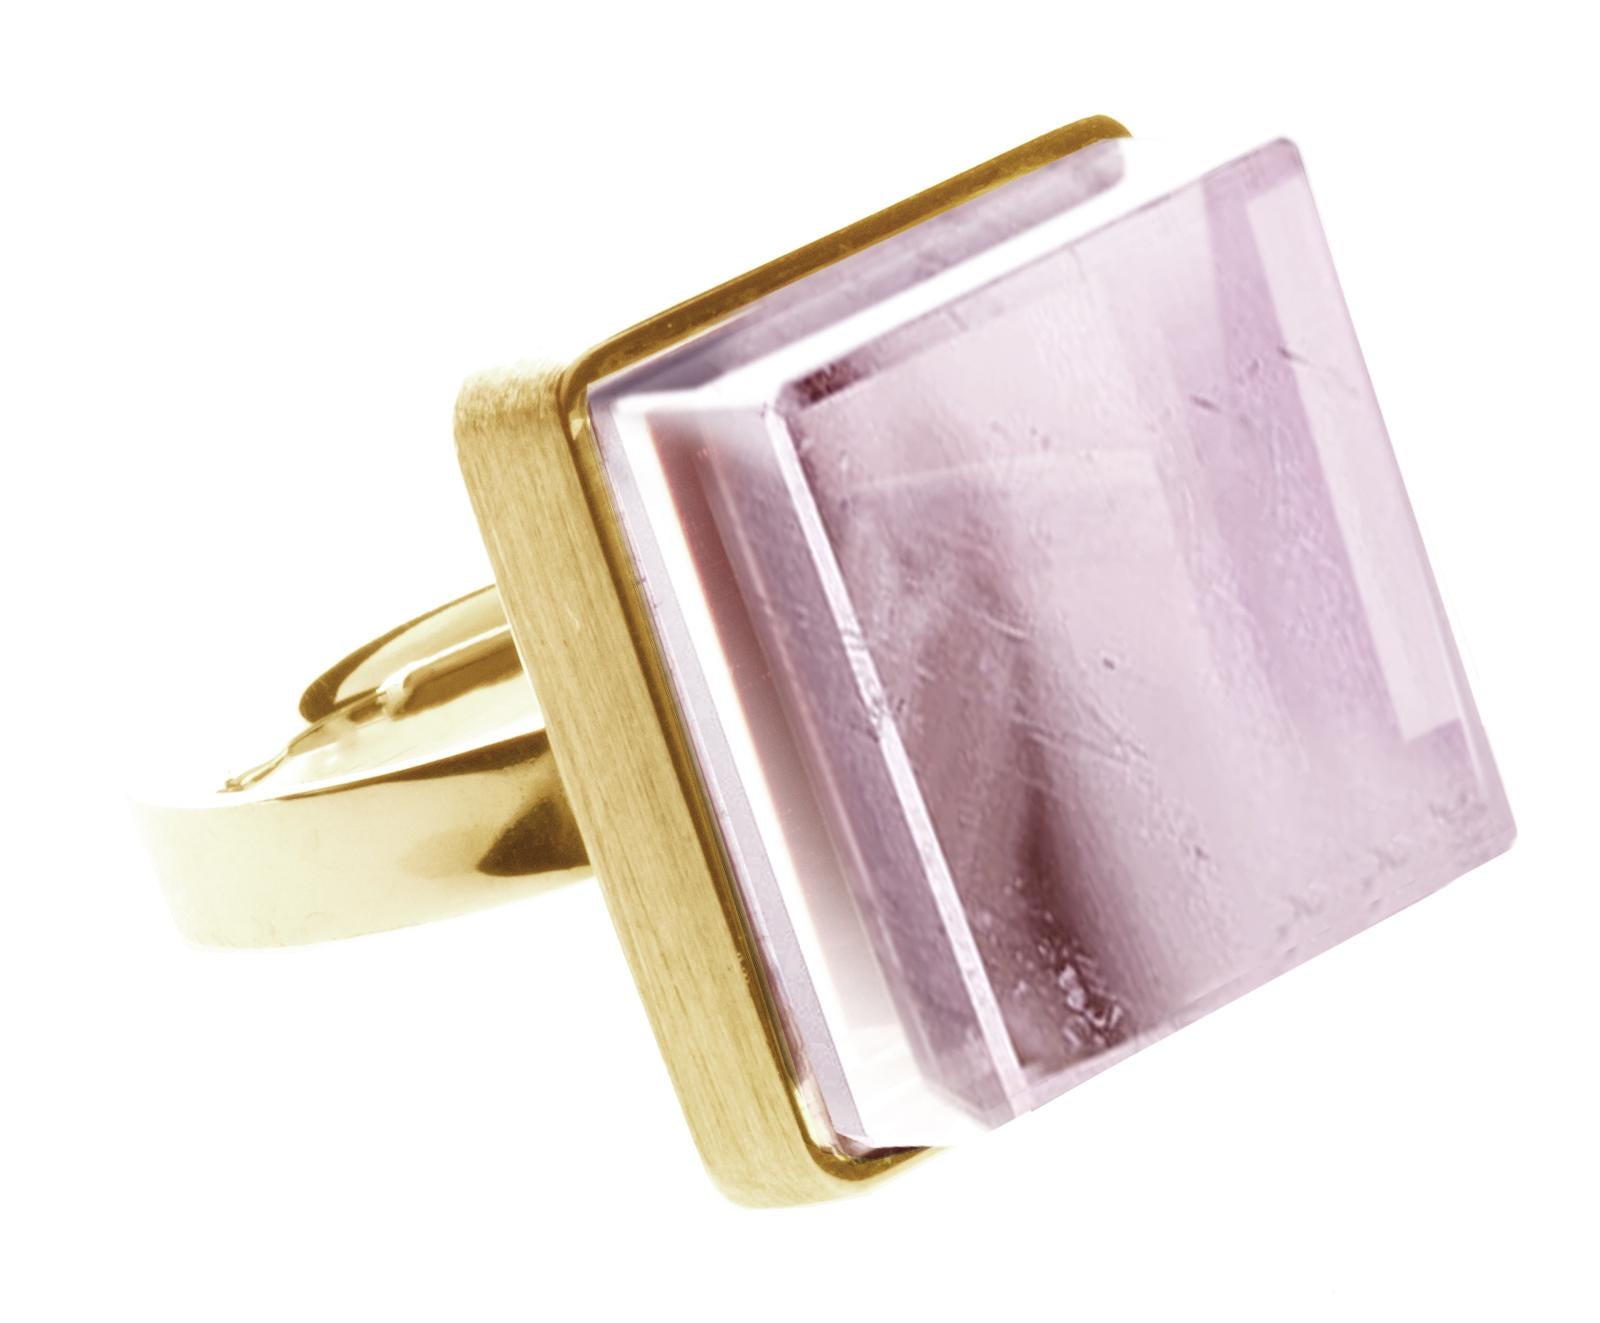 This Art Deco-inspired ring is made of 18 karat rose gold and features a natural pink tourmaline measuring 15x15x8 mm. The ring has been featured in Harper's Bazaar and Vogue UA.

Its design is sure to inspire architects, designers, and artists. The